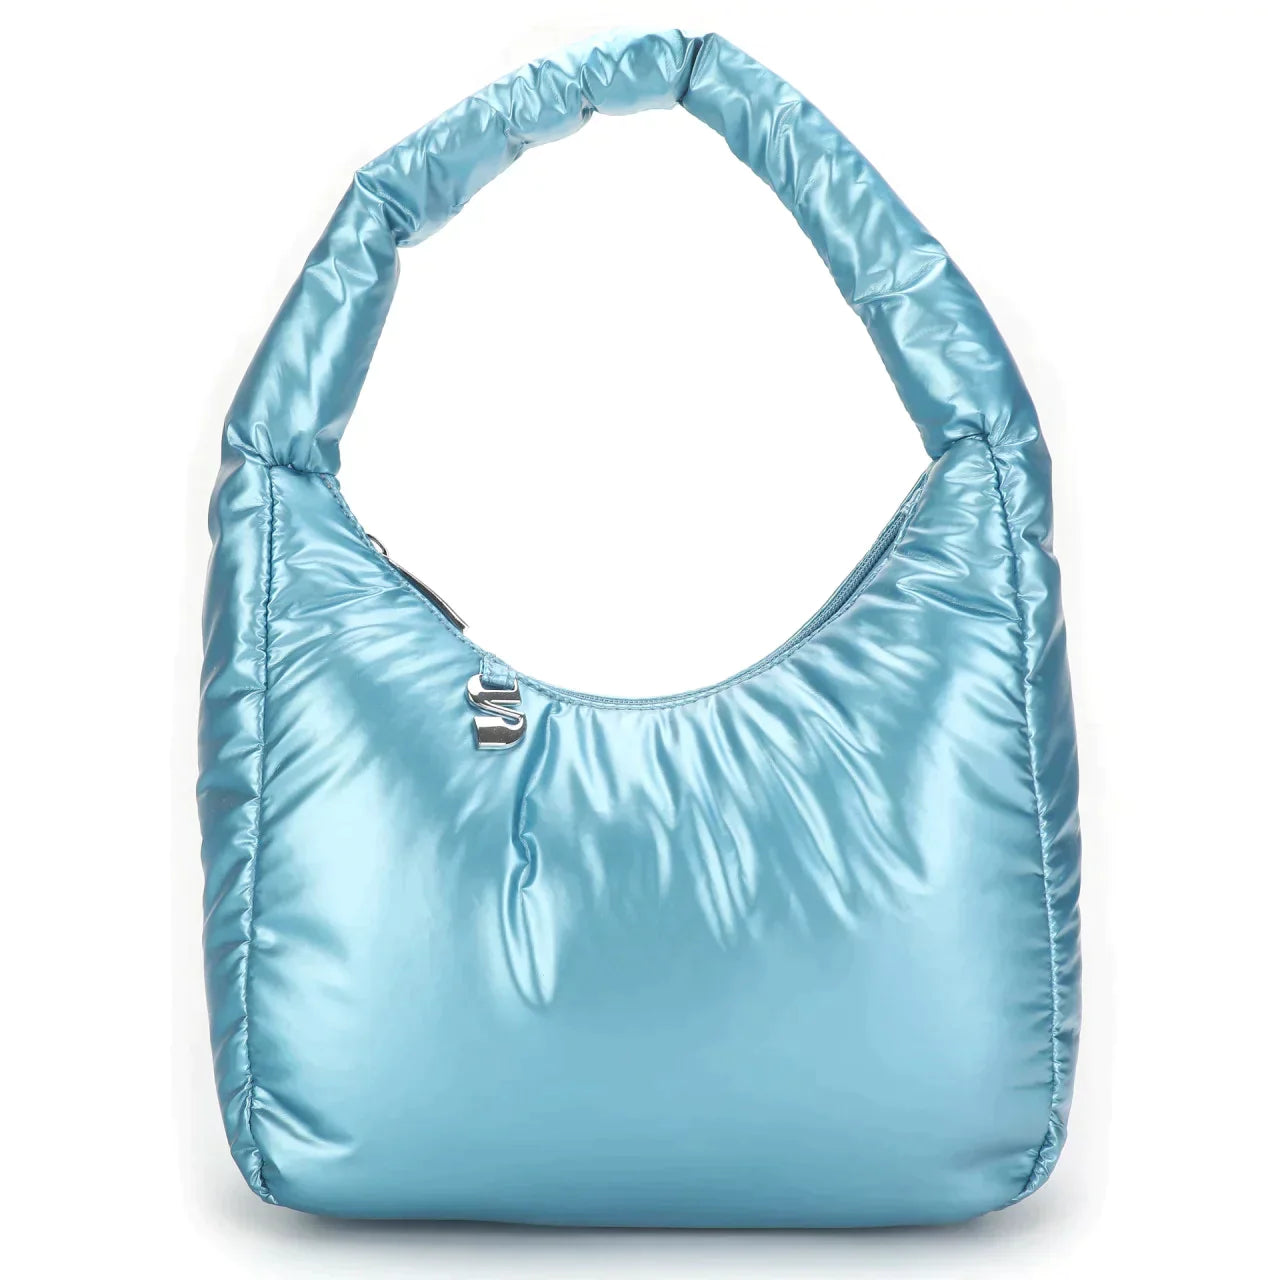 THE SOFIA PADDED MINI SHOULDER BAG - SHINY BLUE - EXCLUSIVE Bags from SILFEN - Just $62.00! SHOP NOW AT IAMINHATELOVE BOTH IN STORE FOR CYPRUS AND ONLINE WORLDWIDE